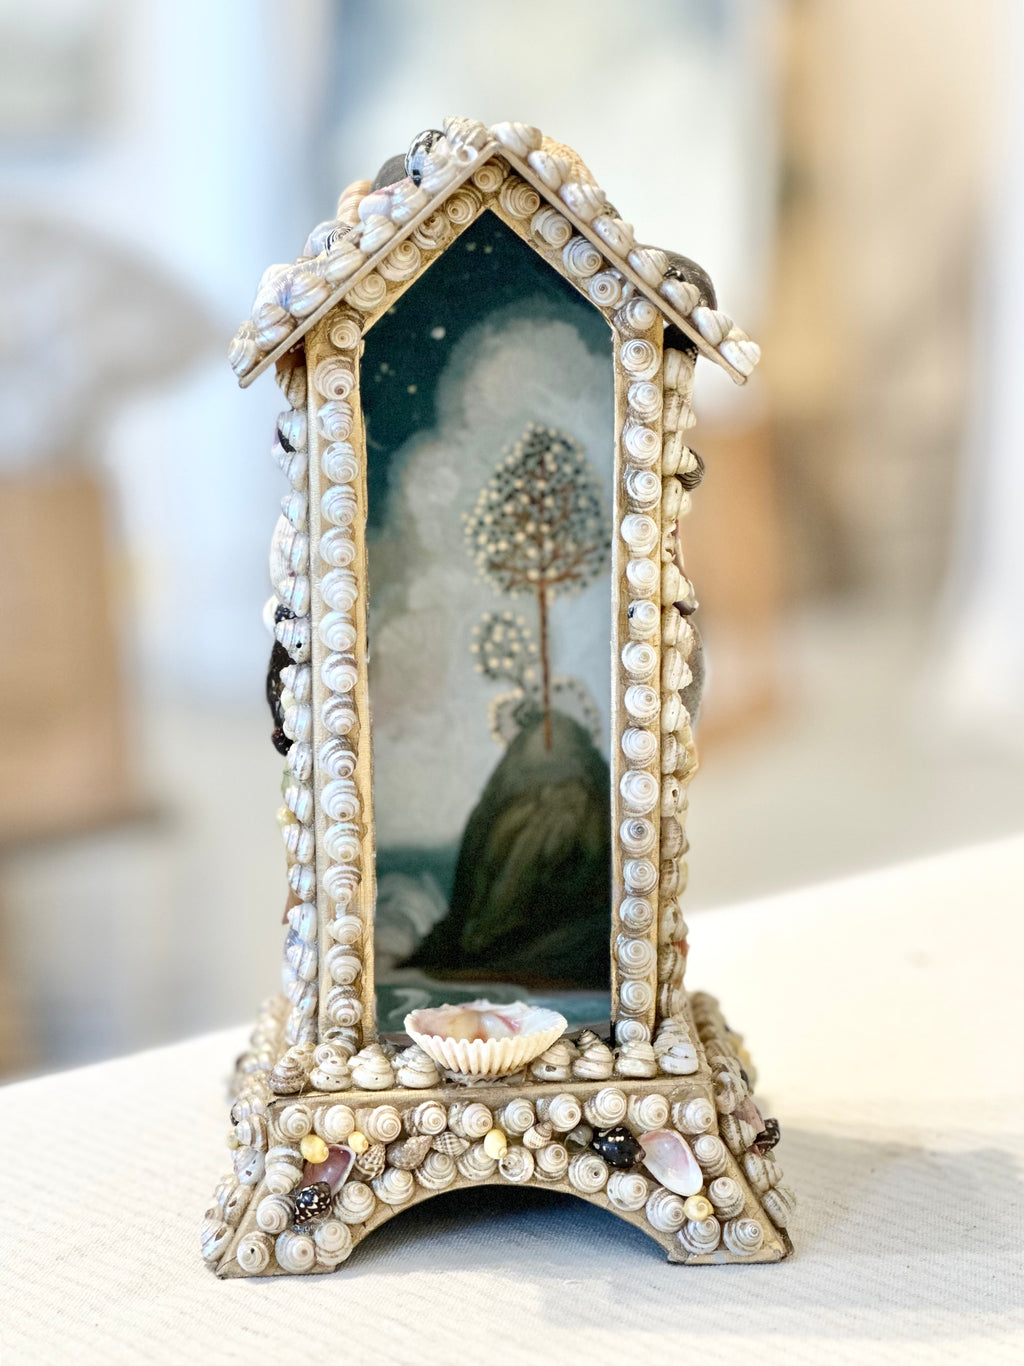 "Reliquary for Otherland" shrine like house of seashells with seascape painted inside